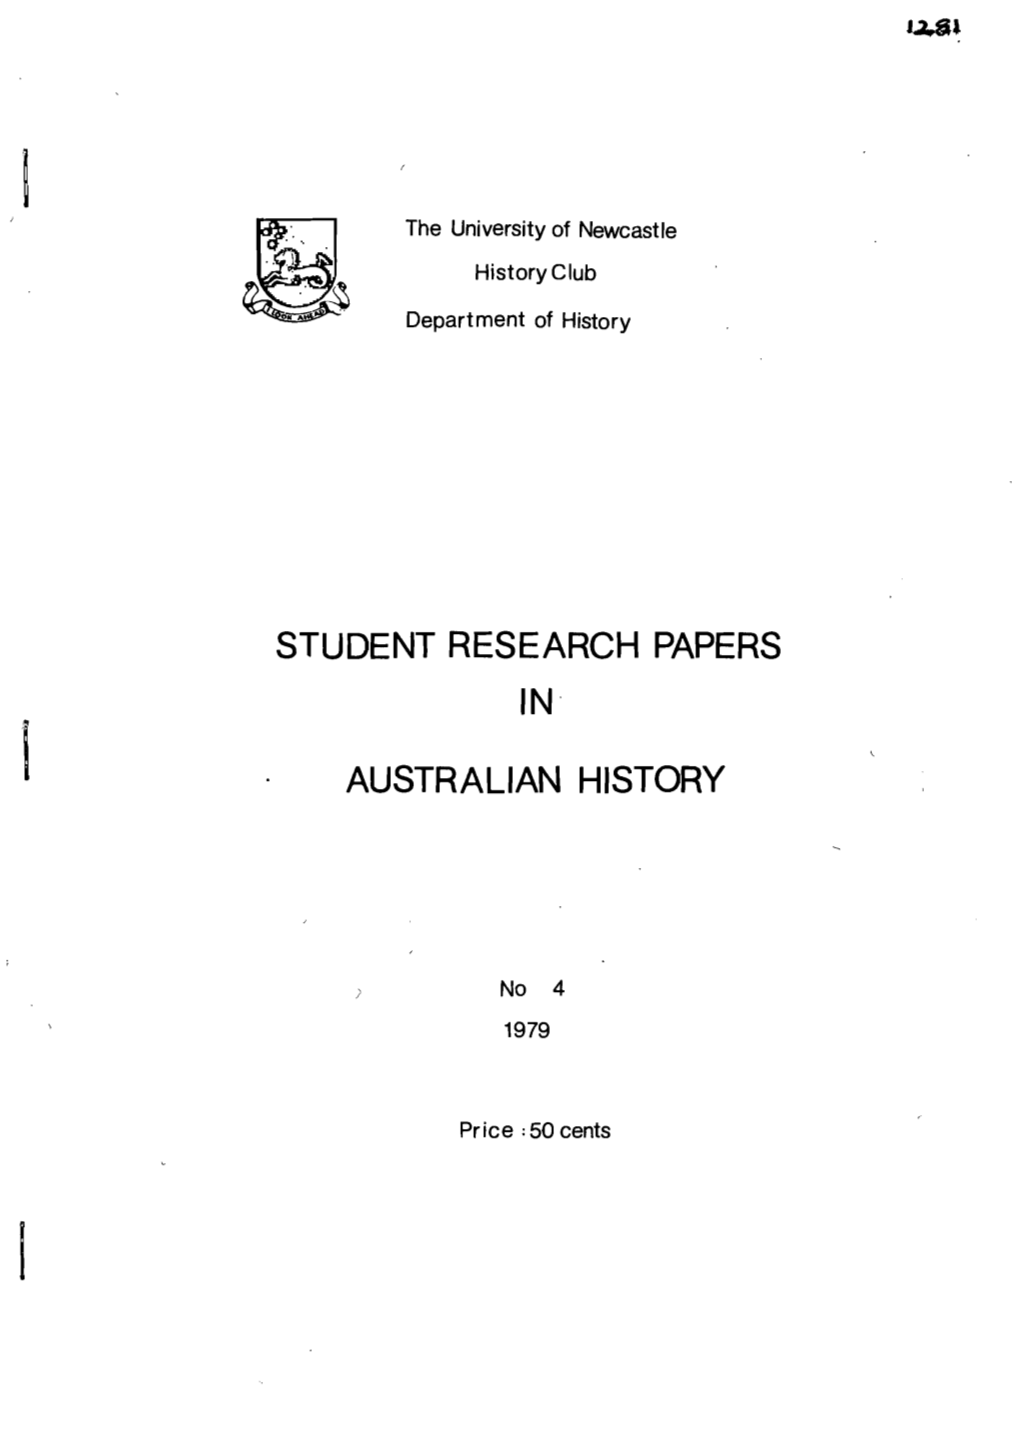 Student Research Papers in Australian History, No. 4, 1979